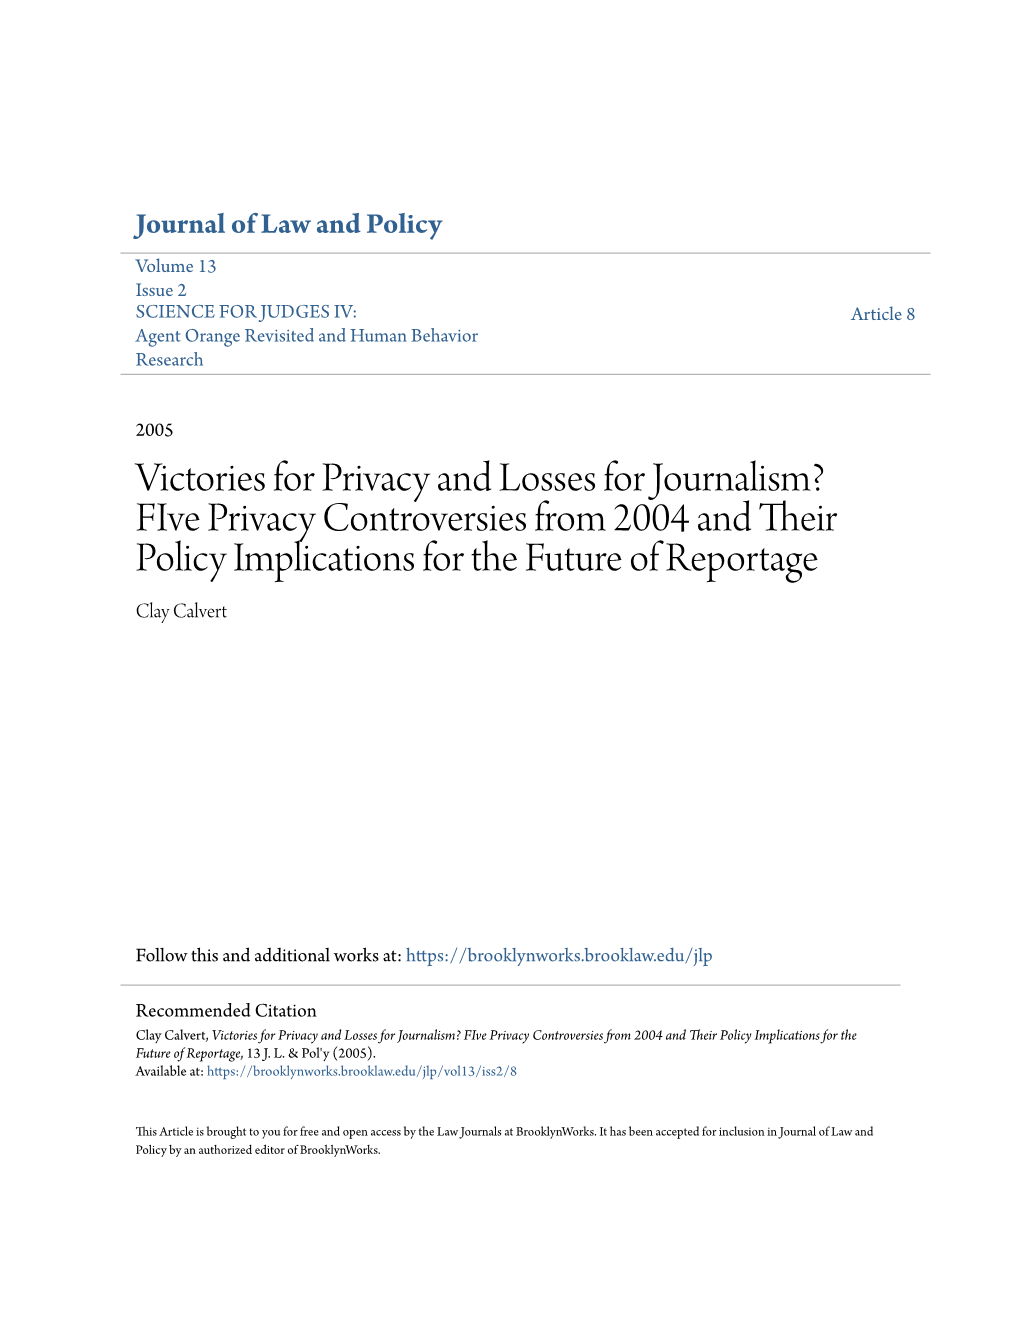 Victories for Privacy and Losses for Journalism? Five Privacy Controversies from 2004 and Their Policy Implications for the Future of Reportage Clay Calvert